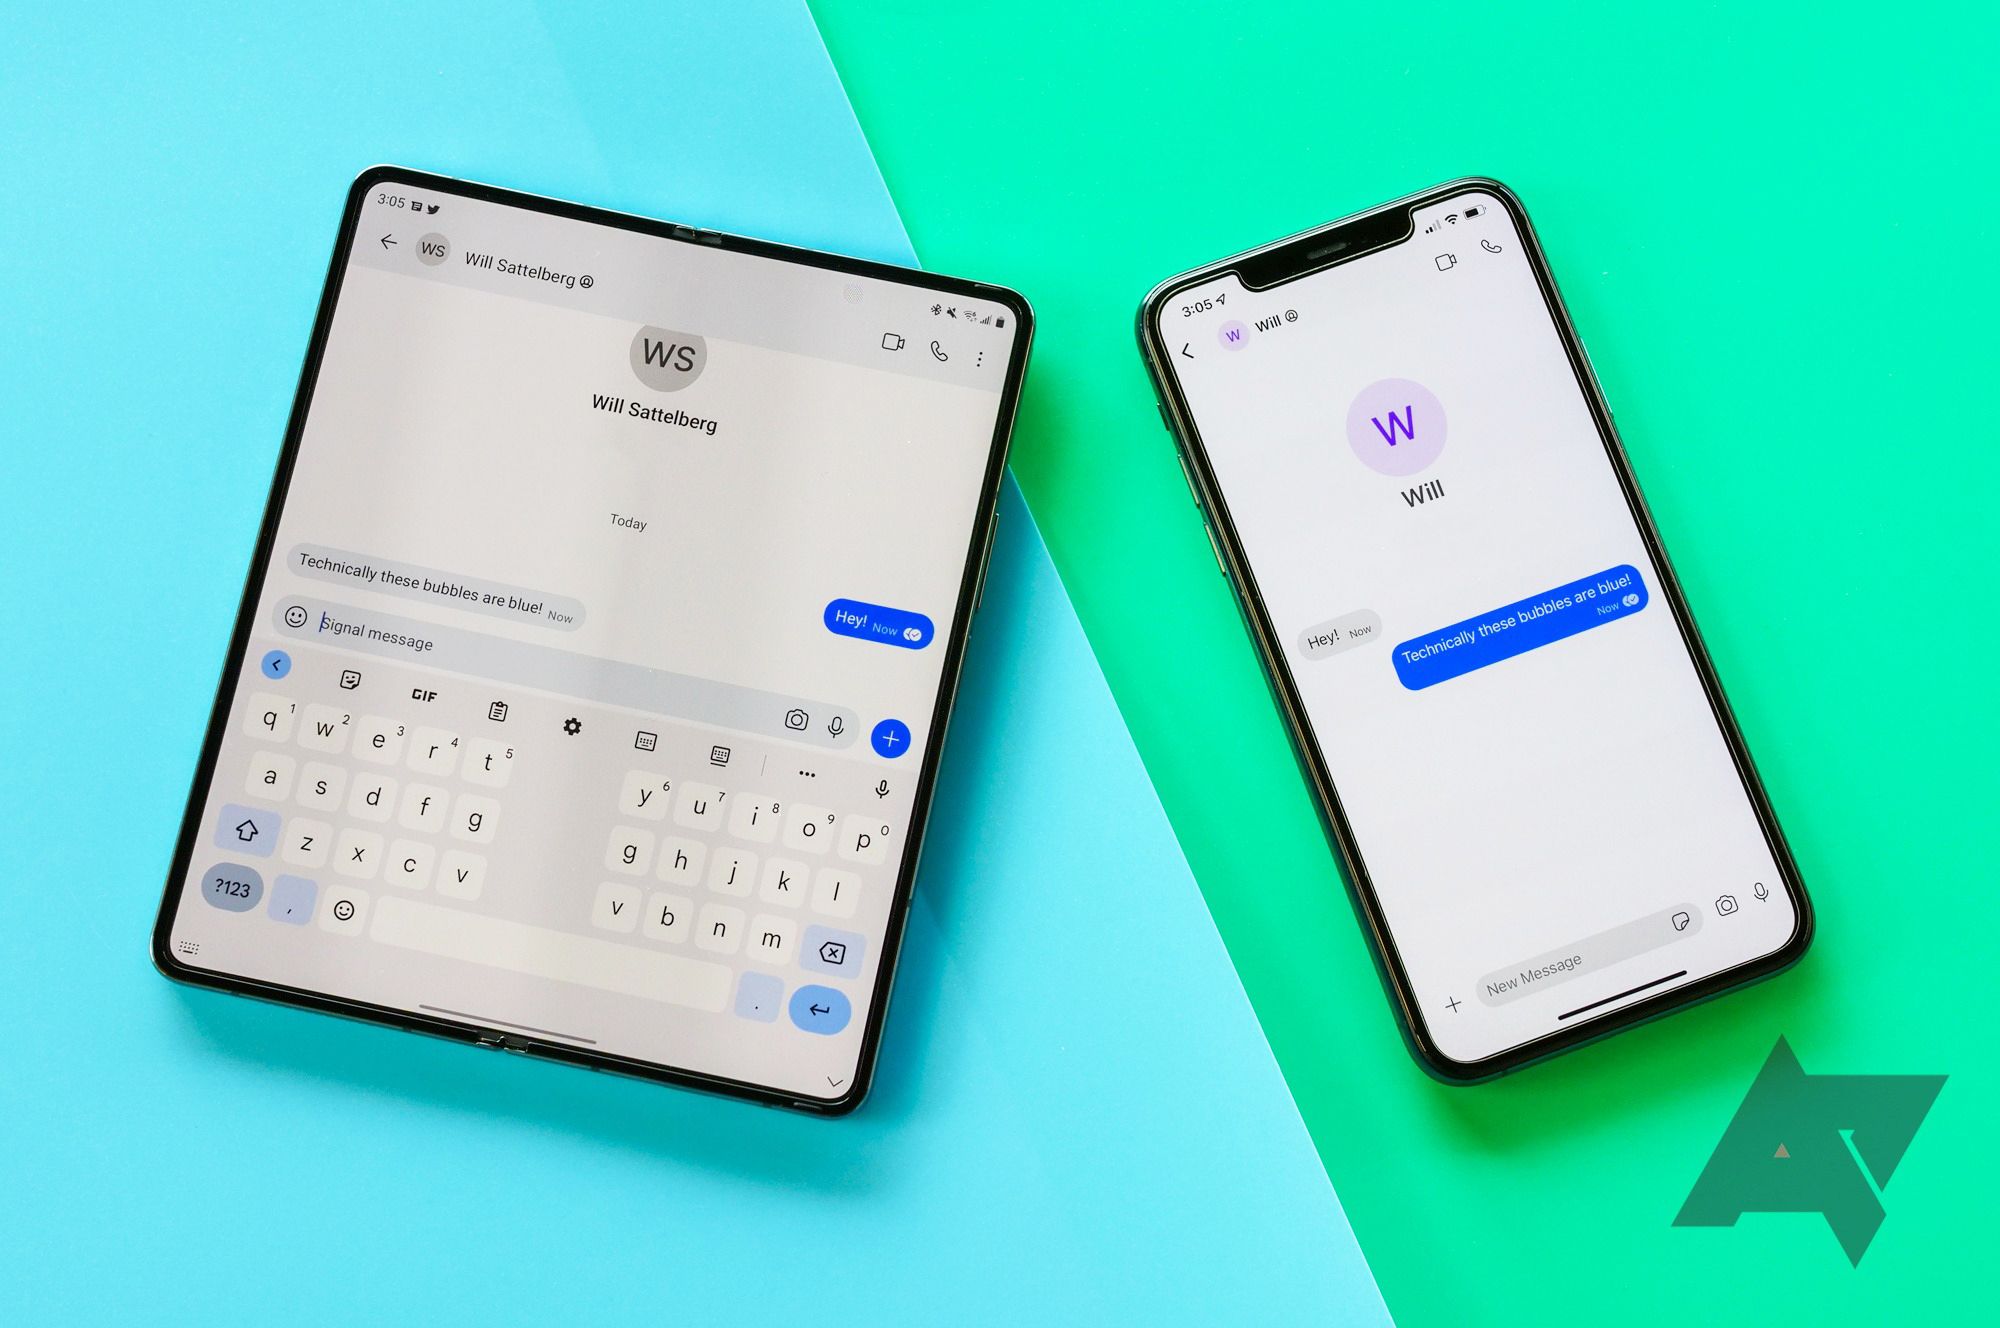 iMessage on the iPhone and Google Messages on the Galaxy Z Fold 4